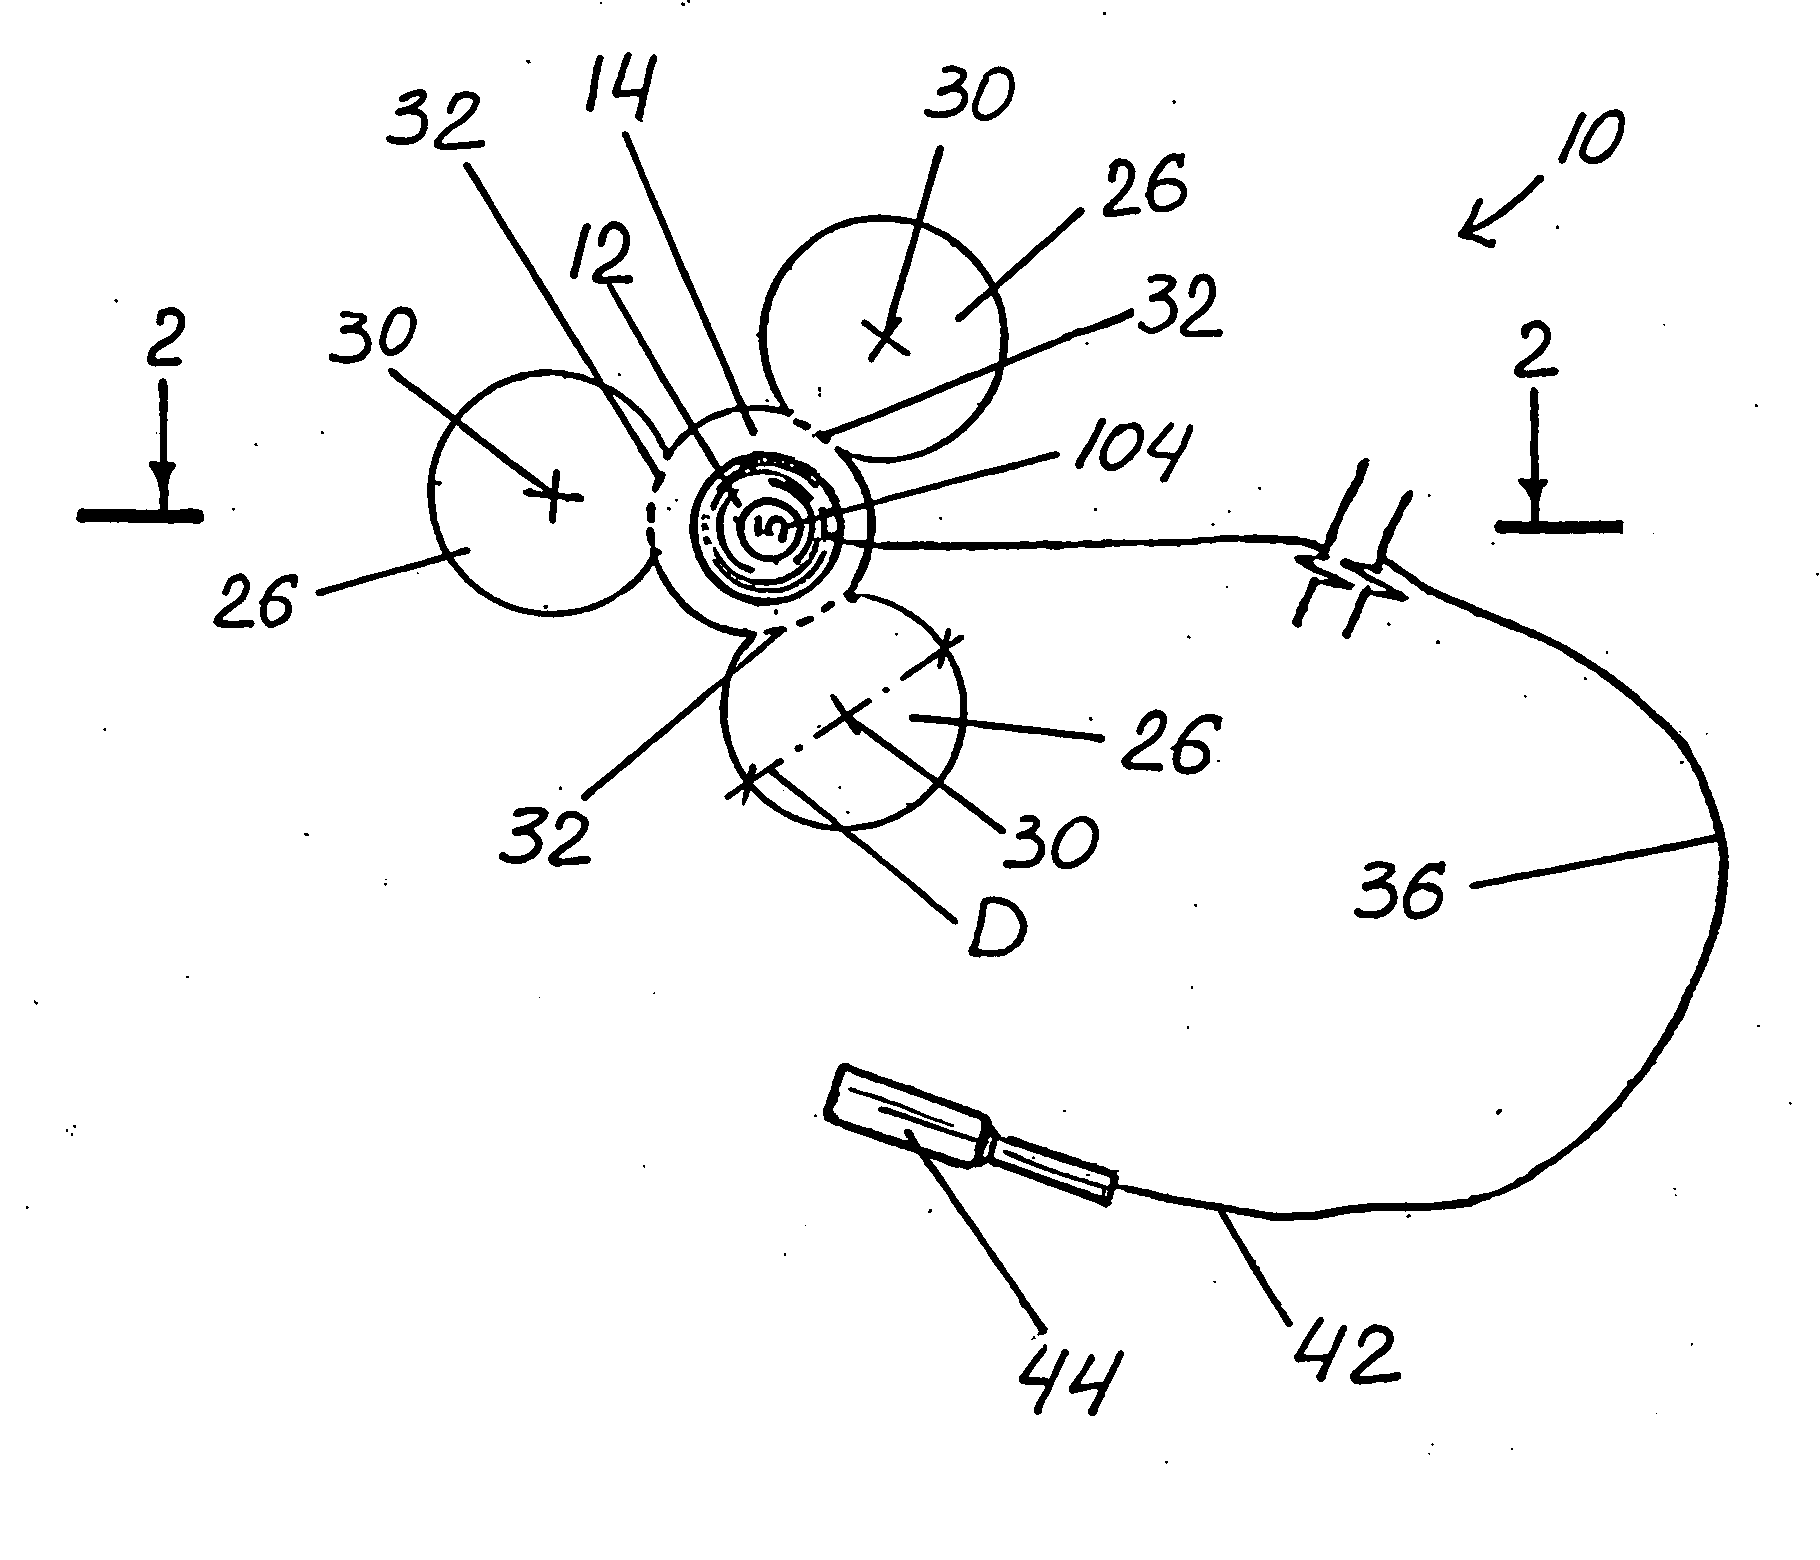 Cortical sensing device with pads